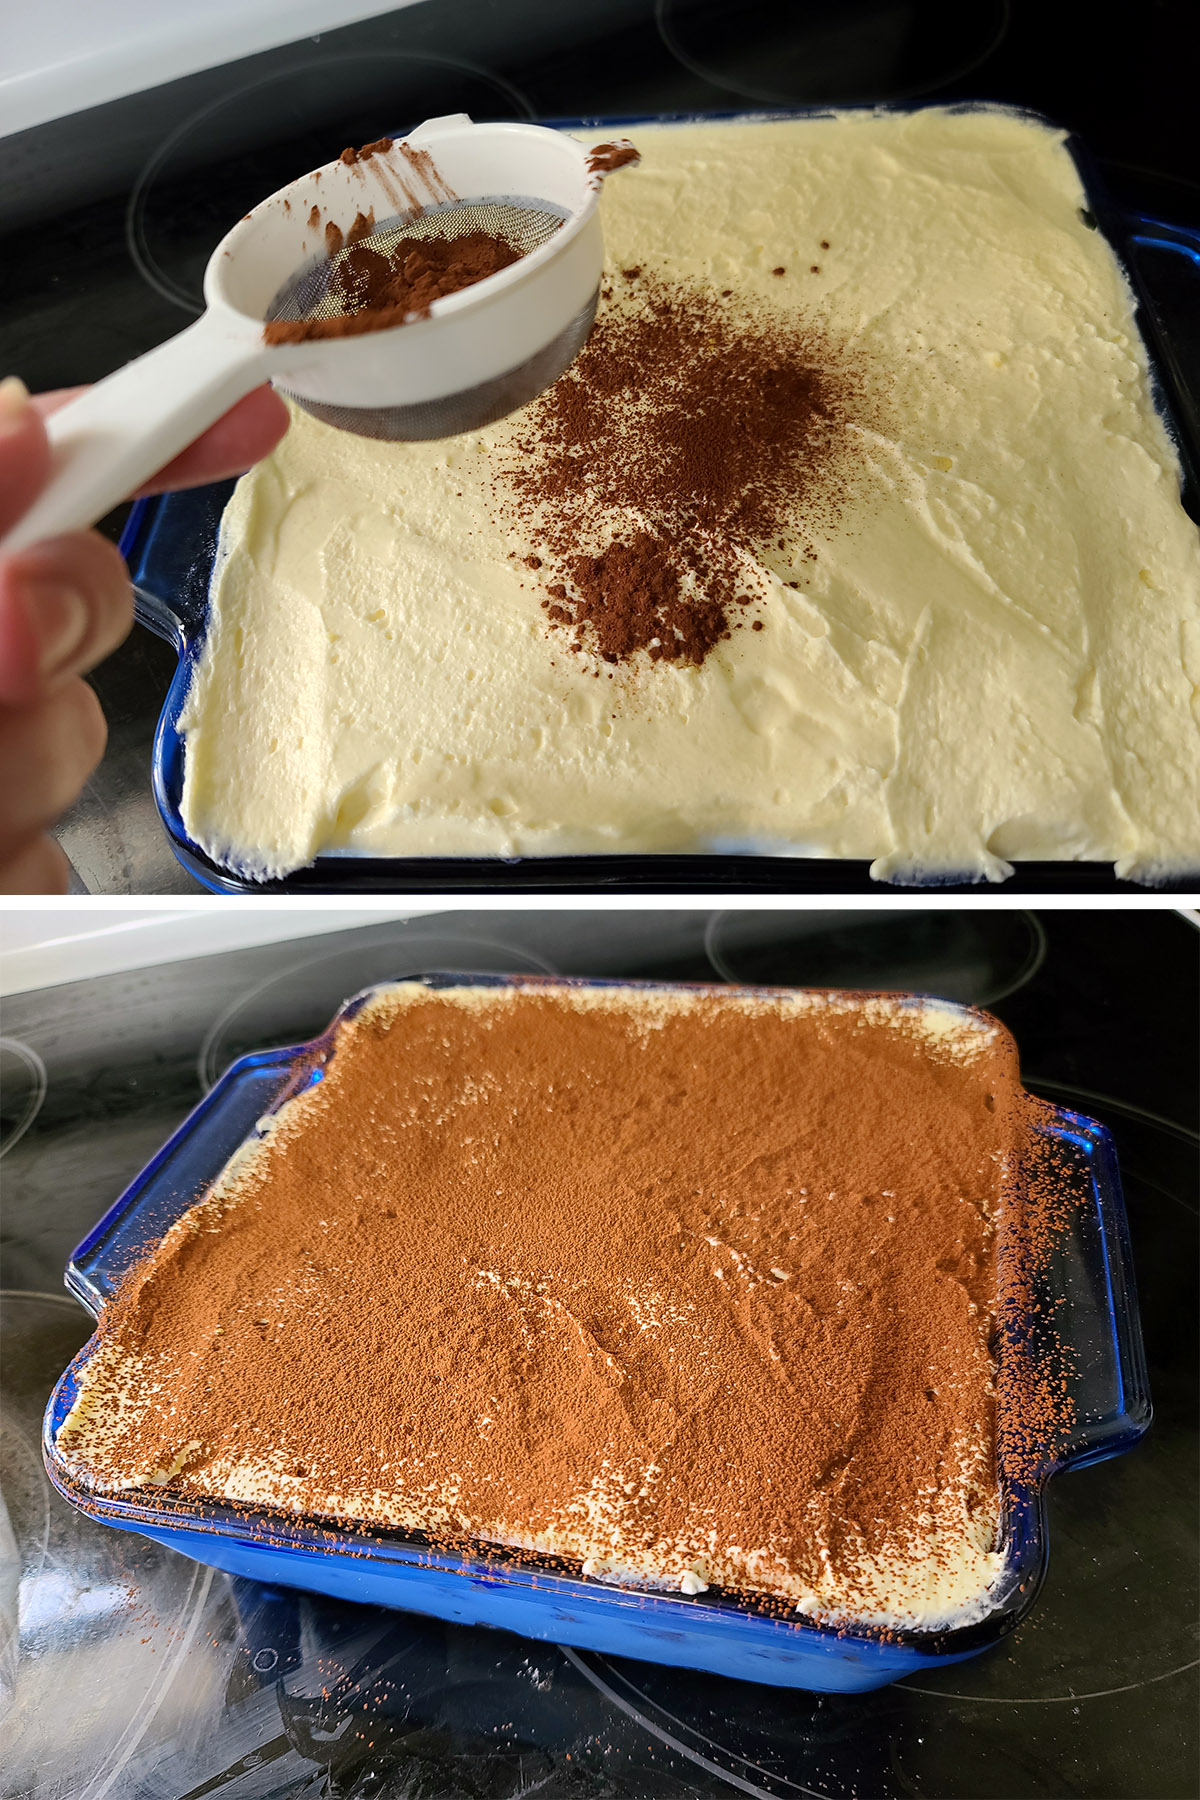 A two part image showing cocoa being sifted over the chilled keto tiramisu.